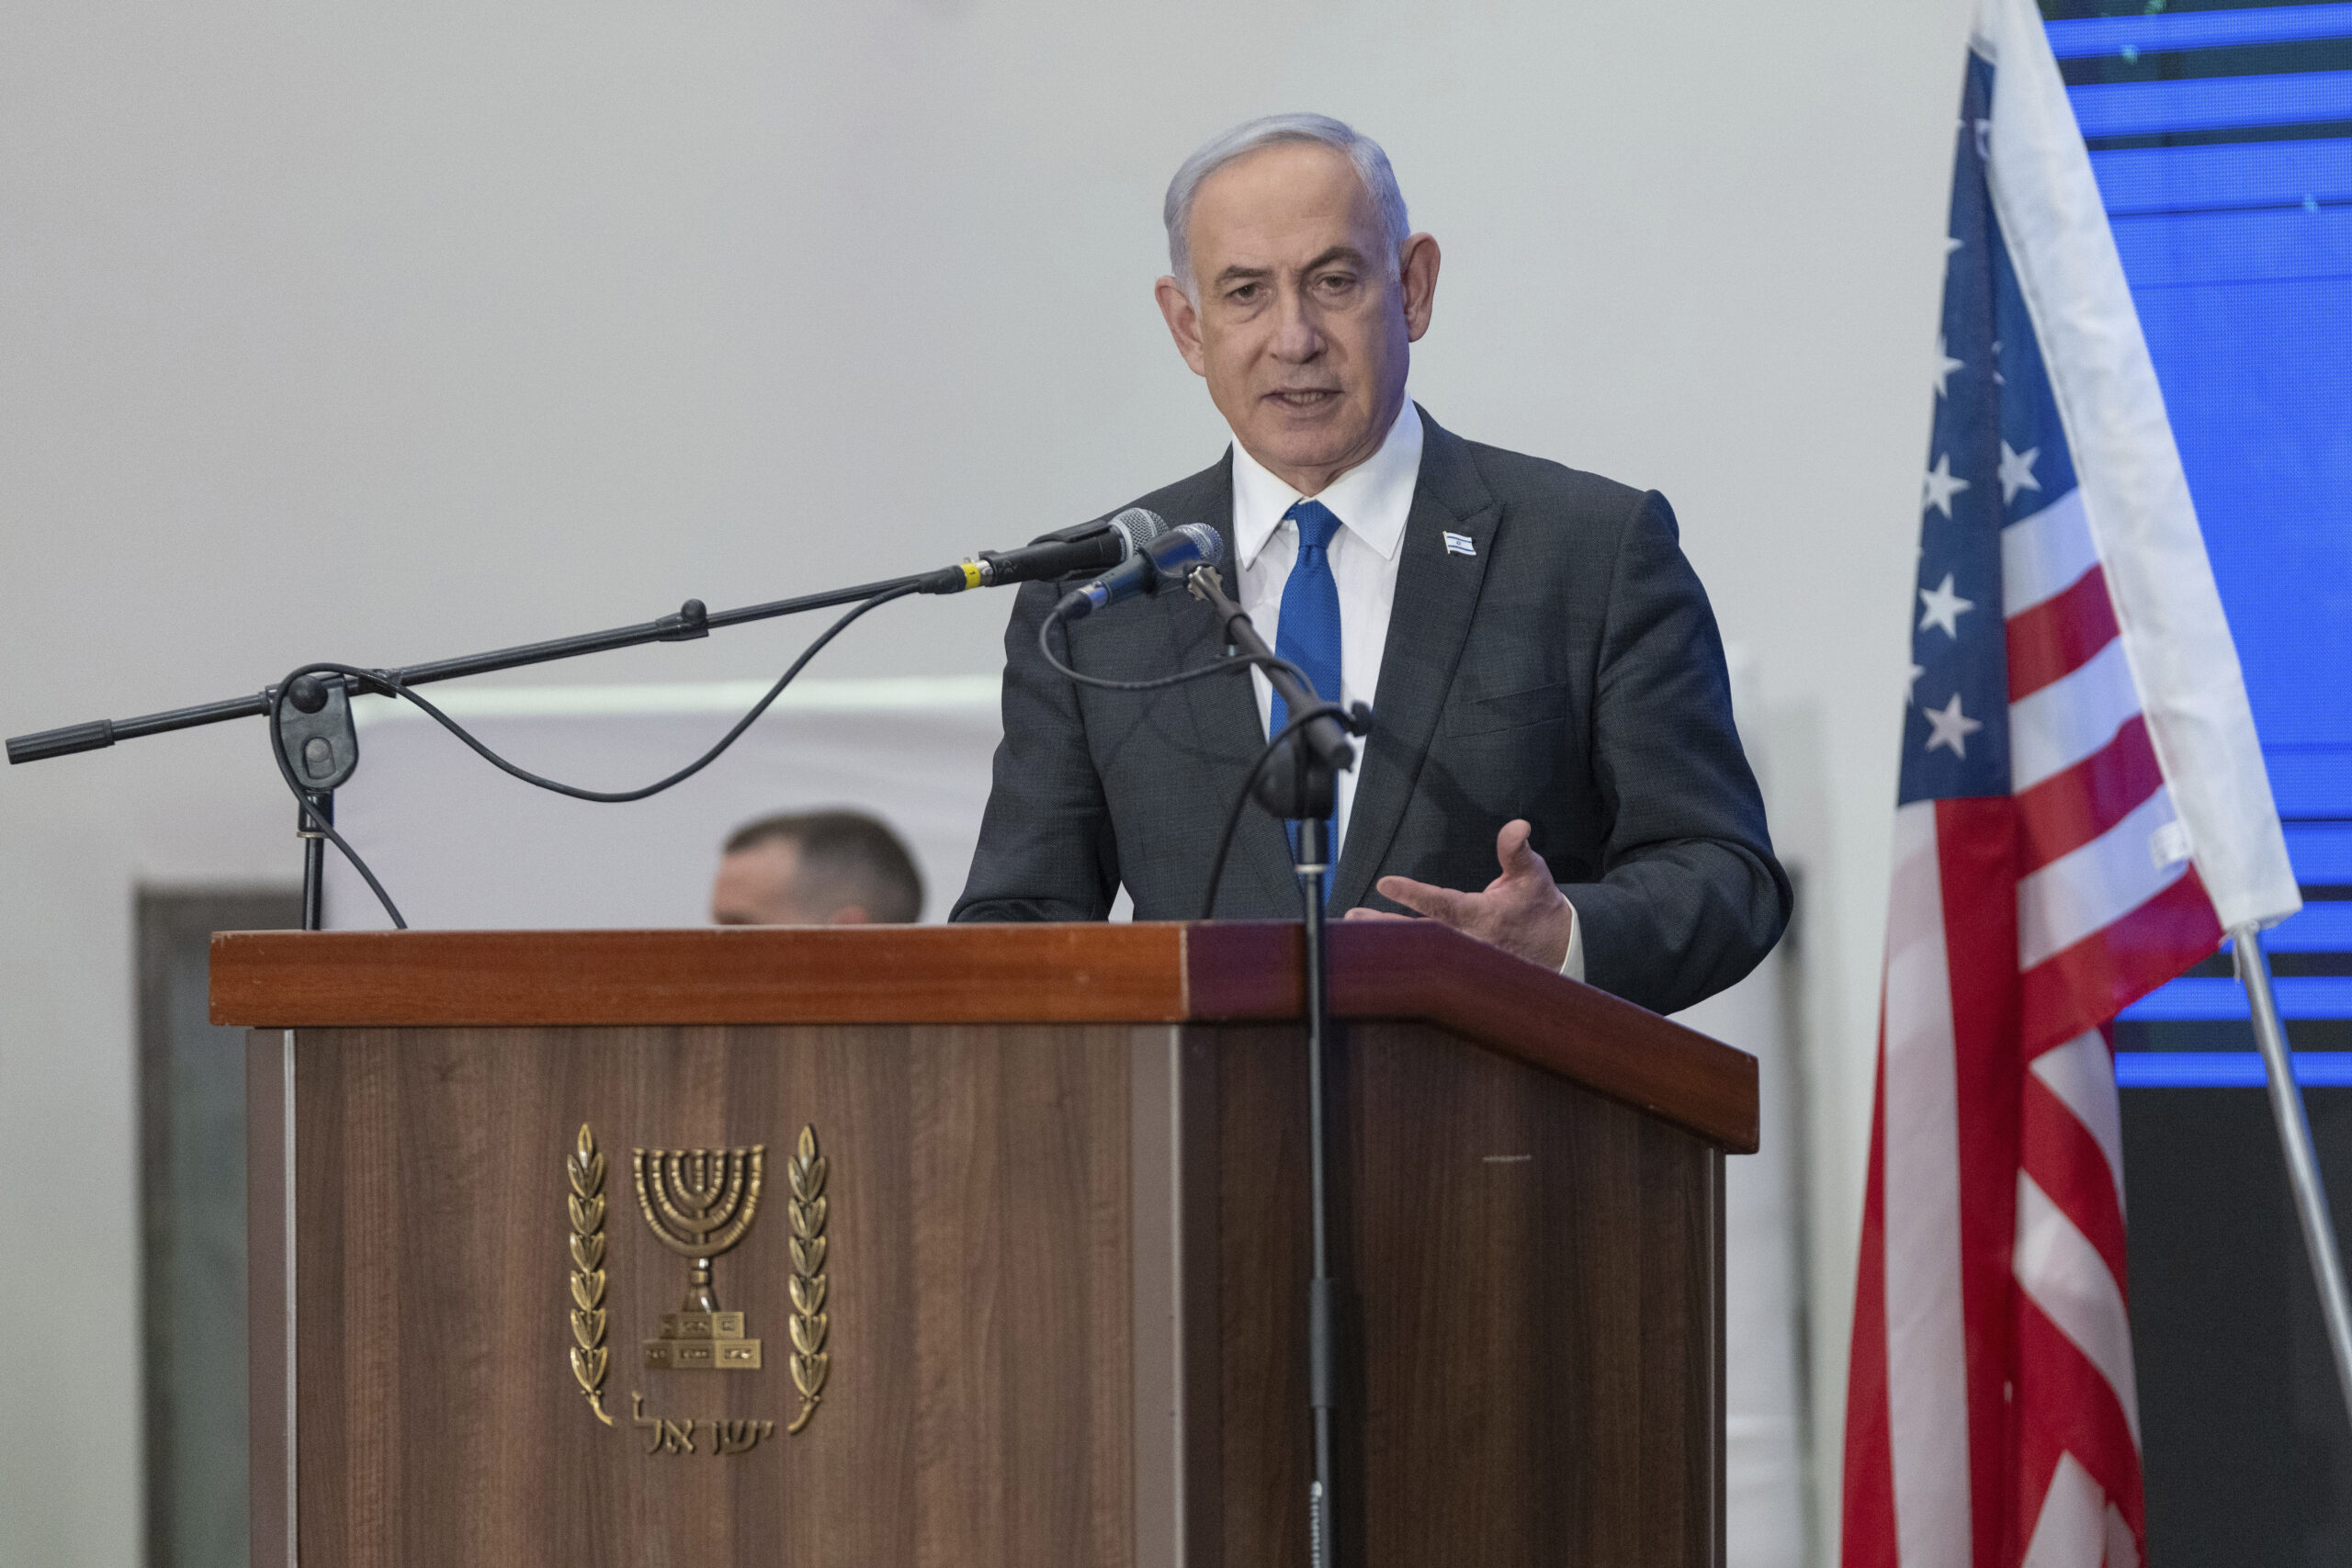 Netanyahu Demands U.S. Send Weapons to Israel More Quickly: ‘Give Us the Tools Faster’